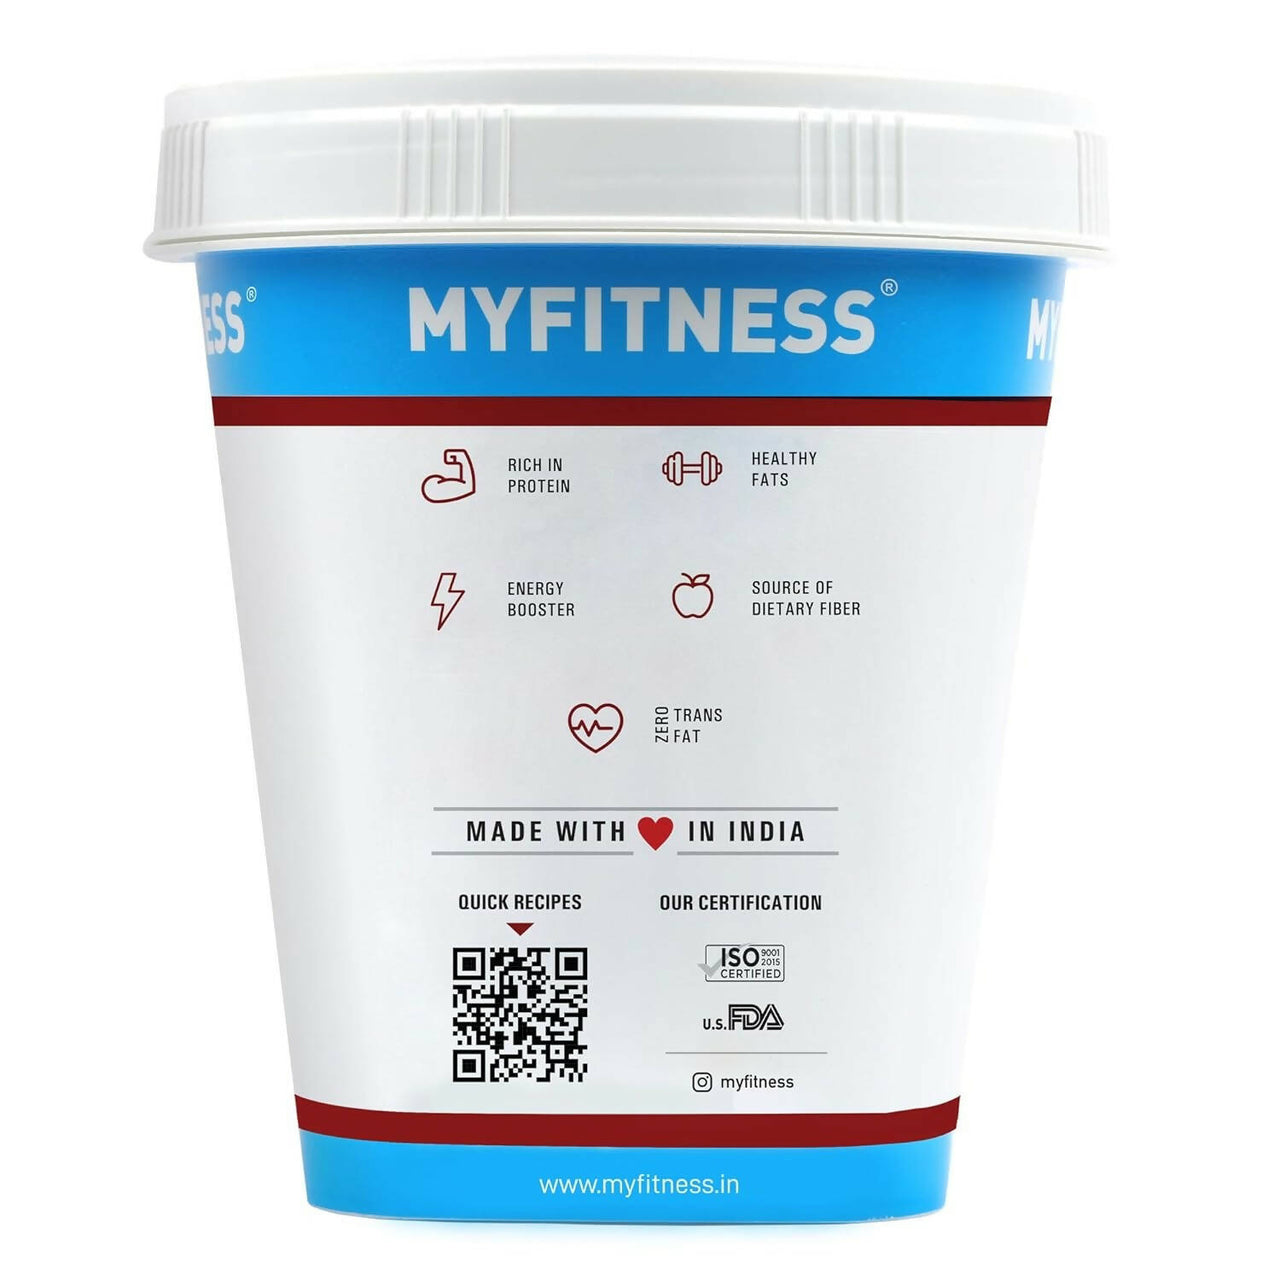 Myfitness Barbeque High Protein Spread & Dip | Smoky Smooth Peanut Butter - Distacart